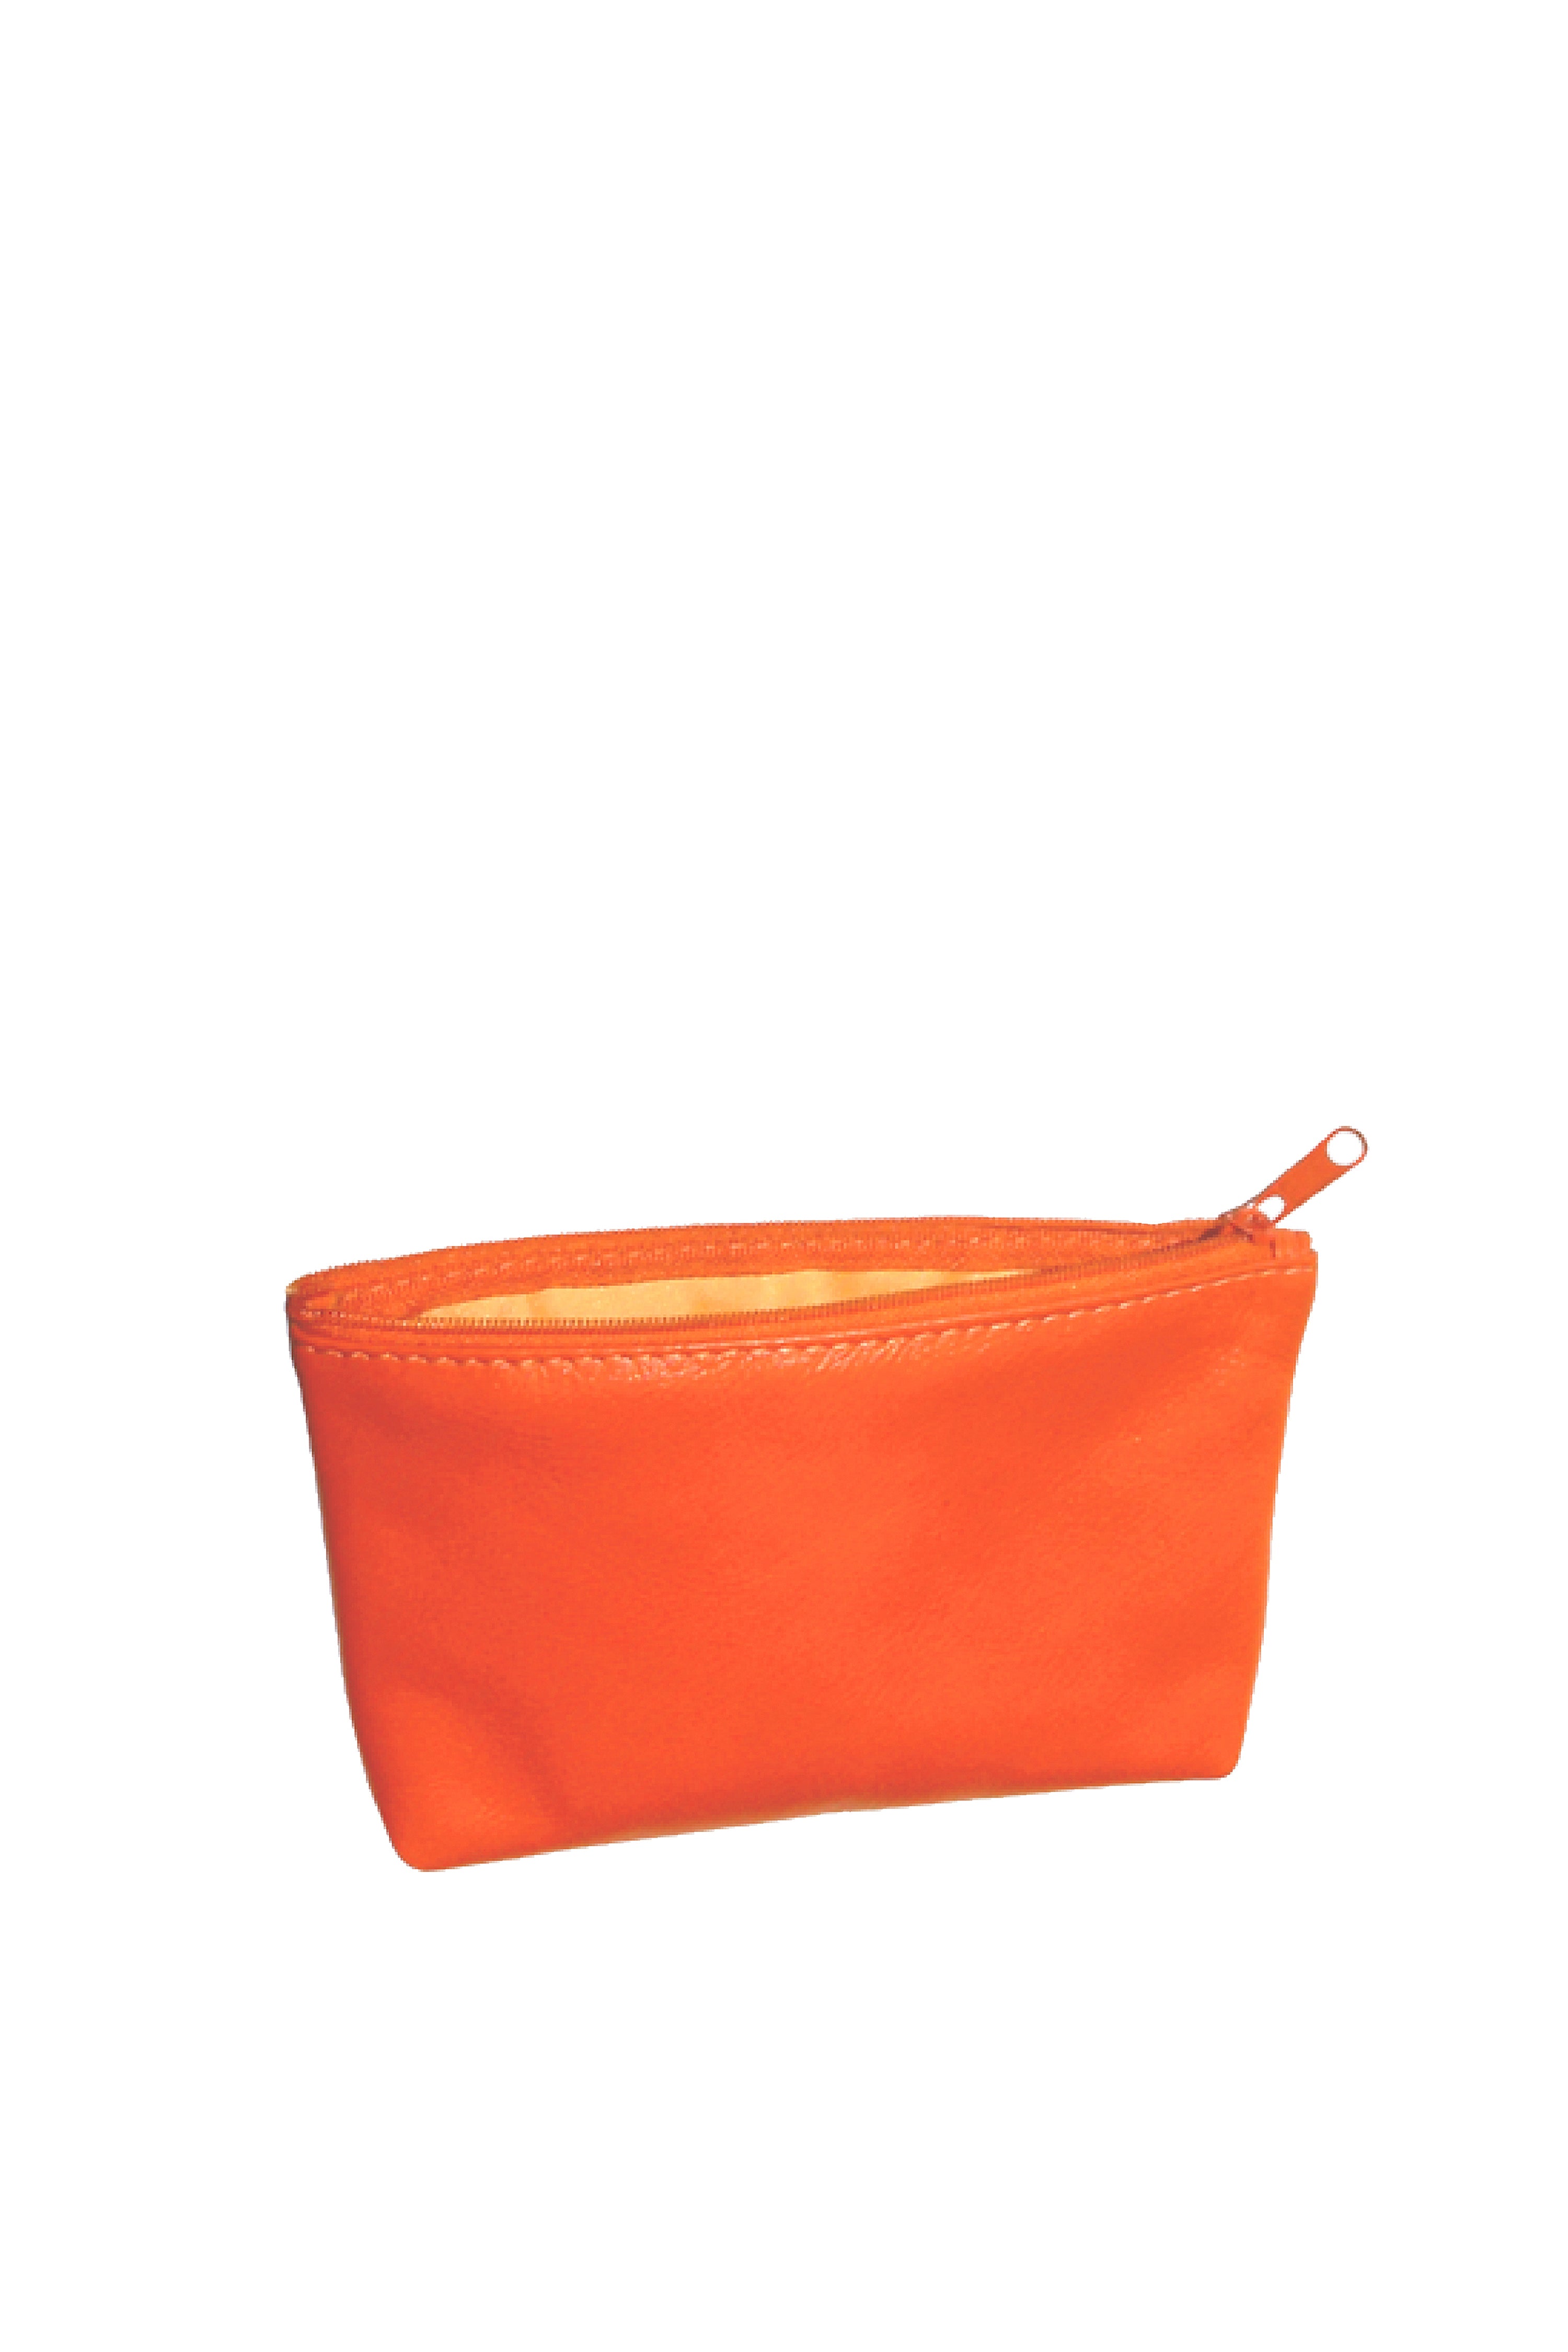 Leather pouch, zip closure. Vivid orange with light orange lining and stitch. Removable branded leather tab with metal coin tags. Sustainable, upcycled.